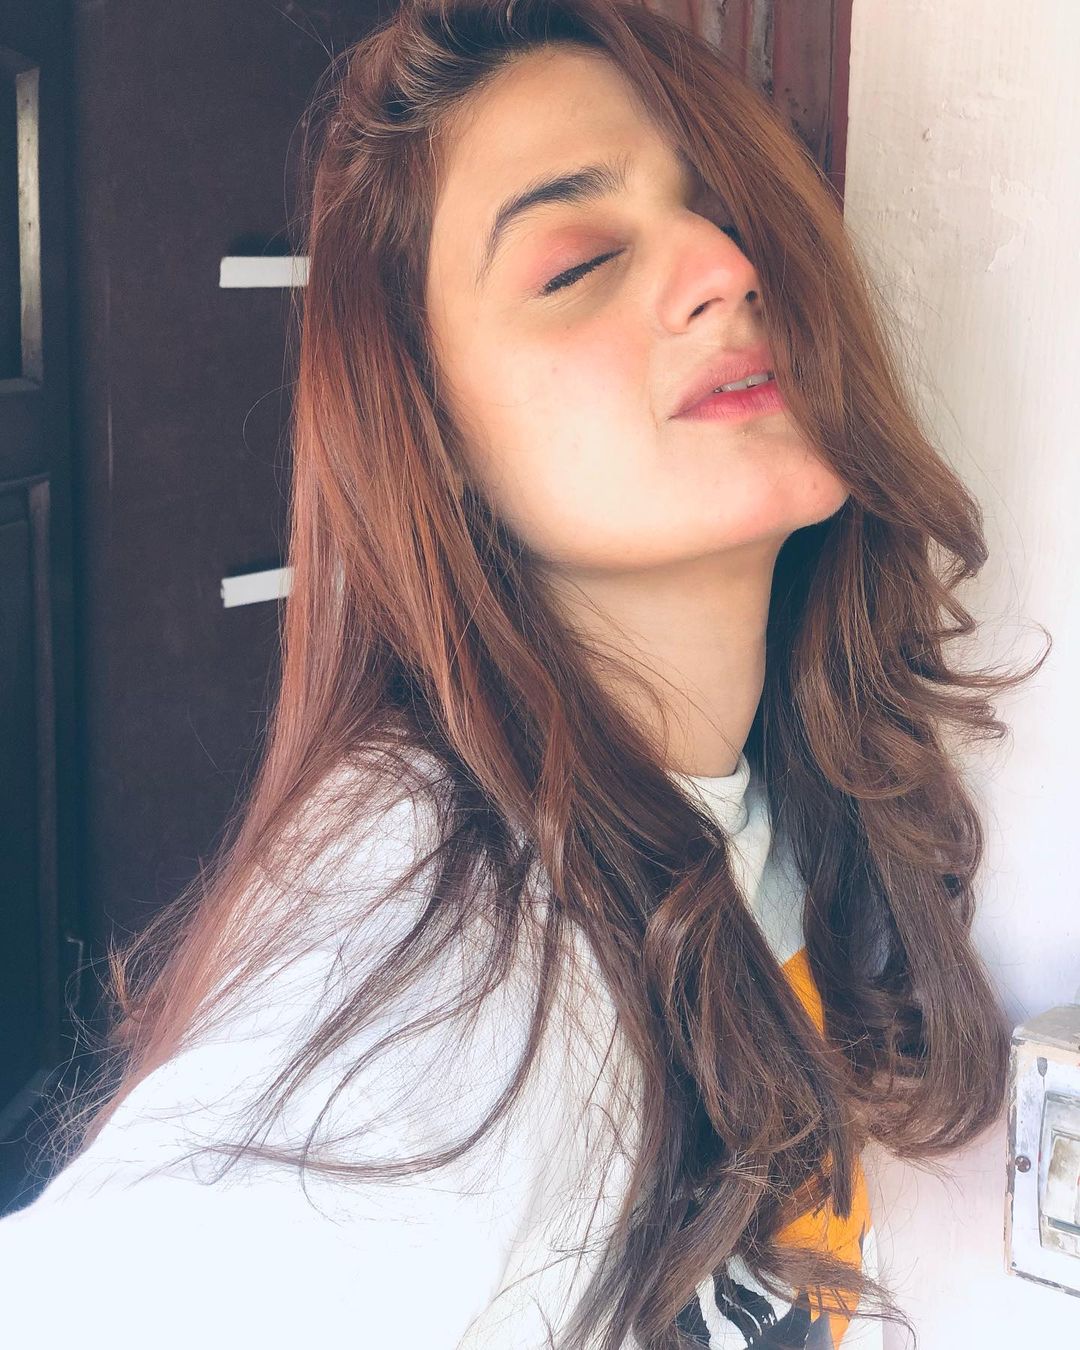 Hira Mani Latest Pictures with her Family